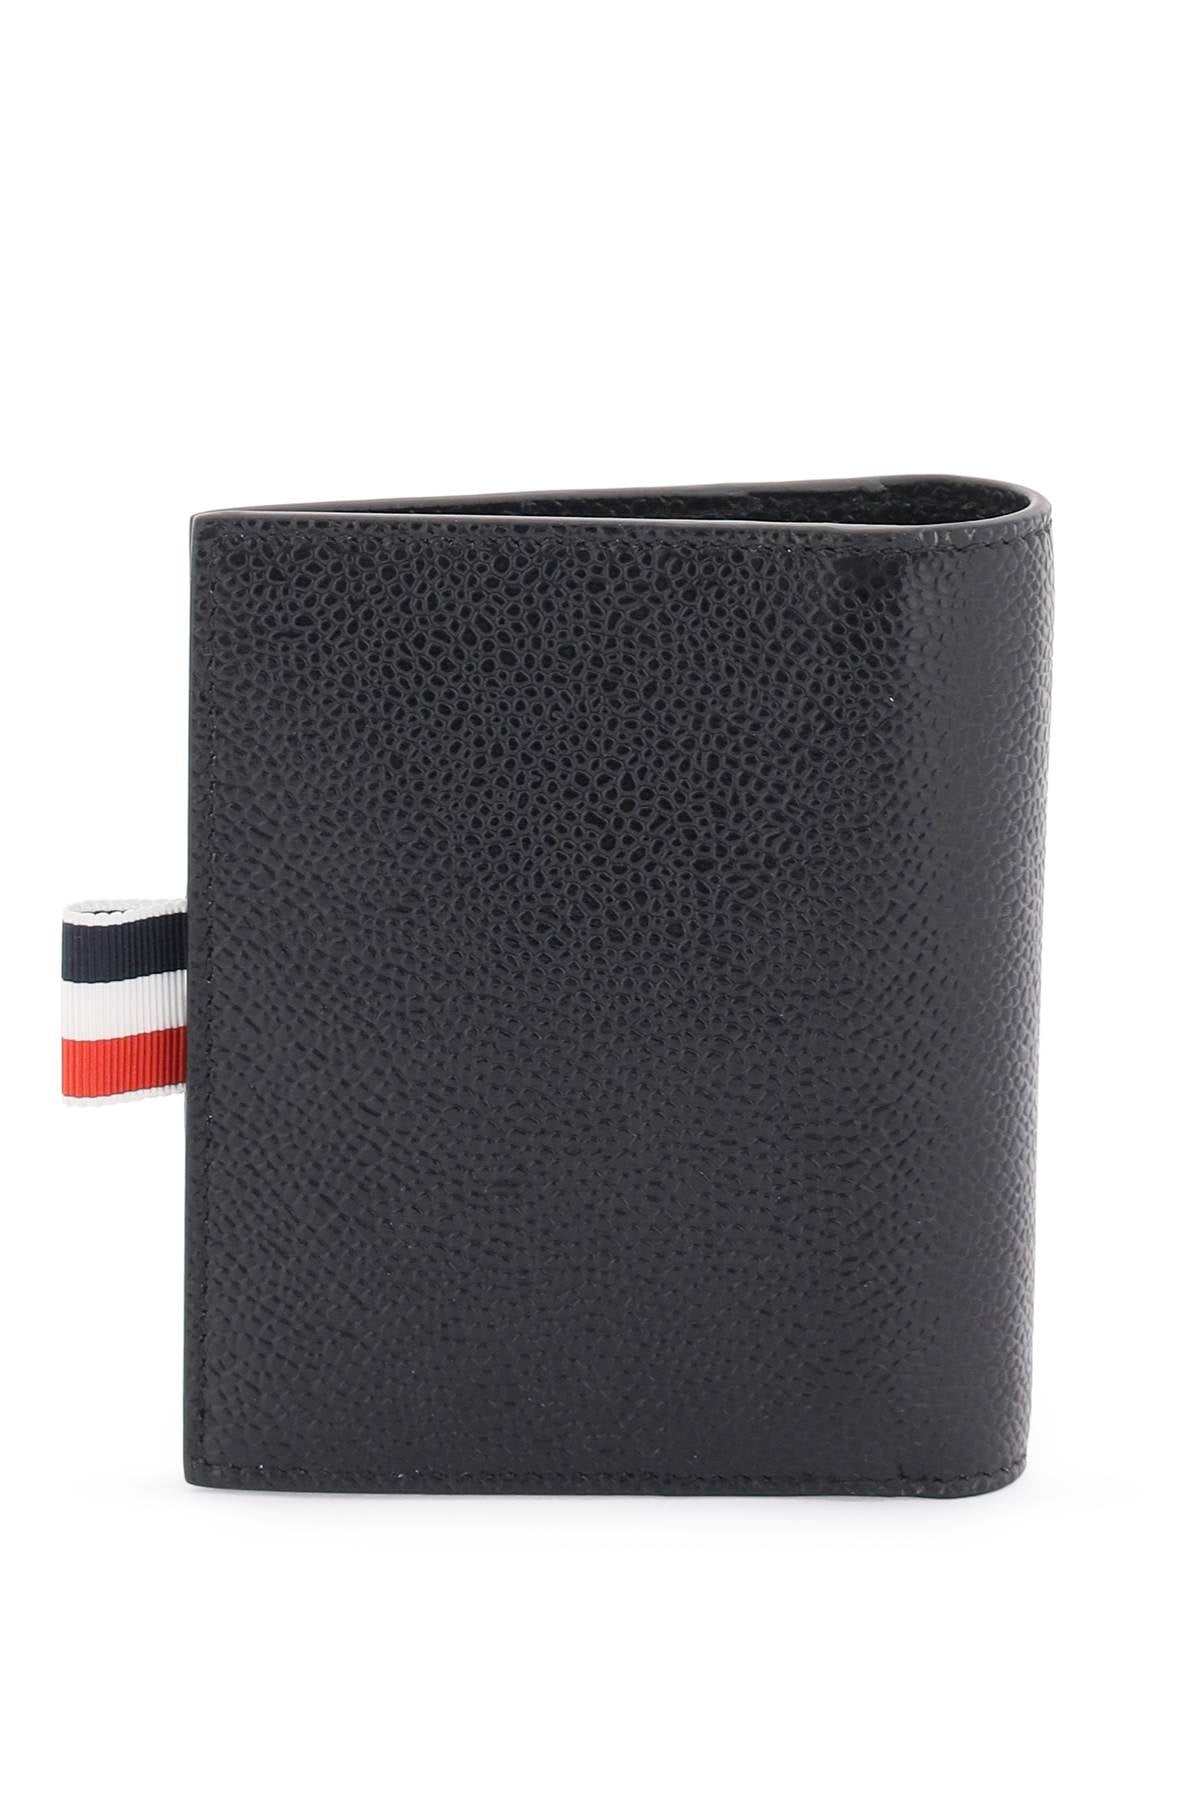 Sleek and Stylish Card Holder in Black Leather